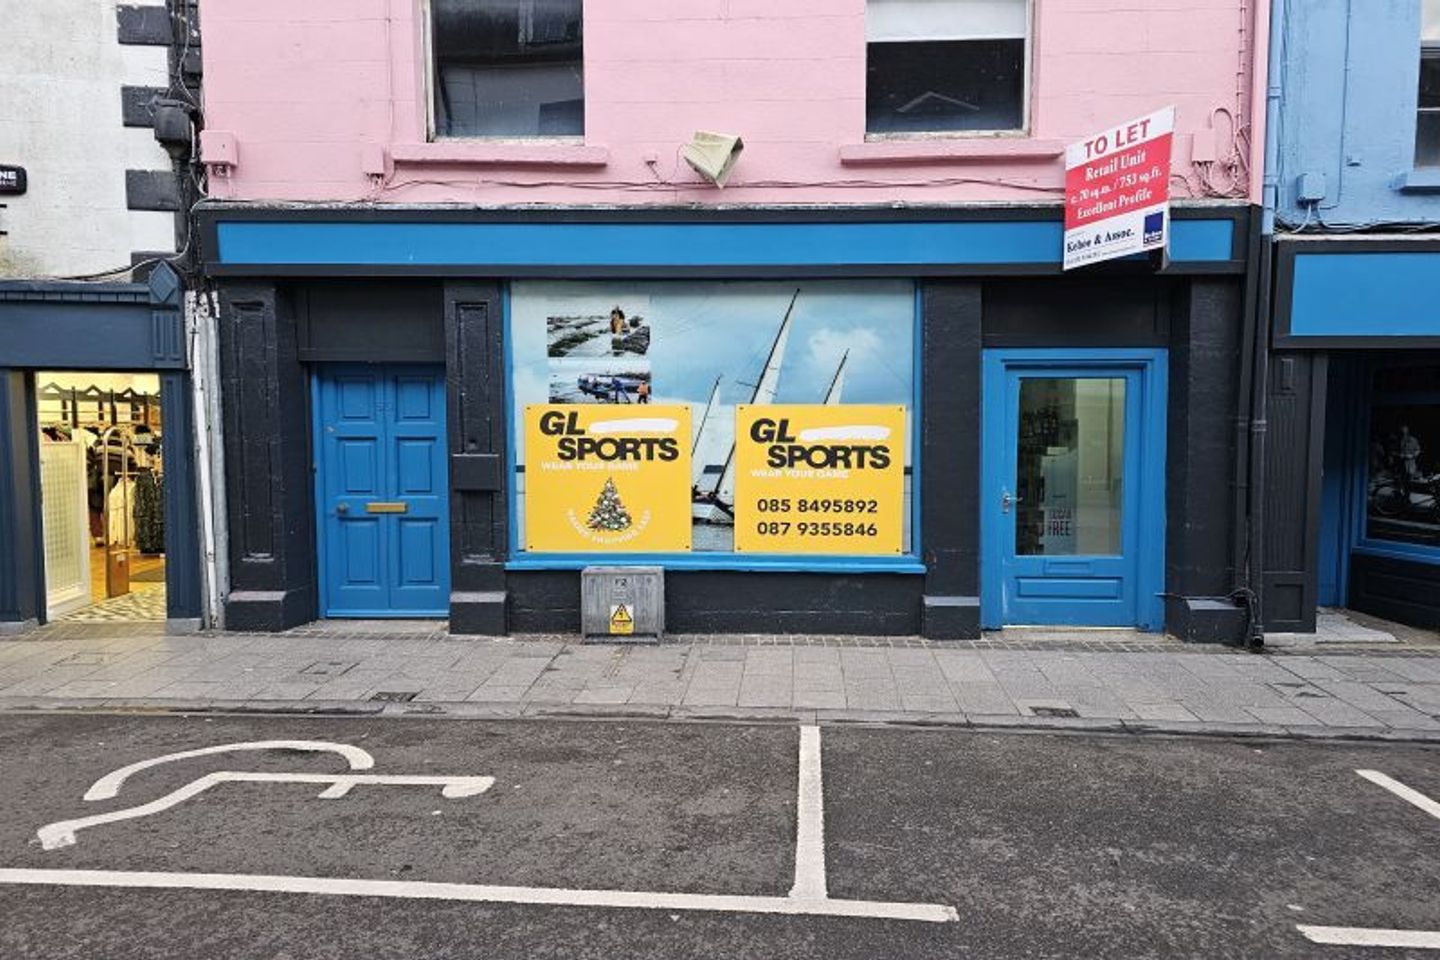 No. 59 South Main Street, Wexford Town, Co. Wexford